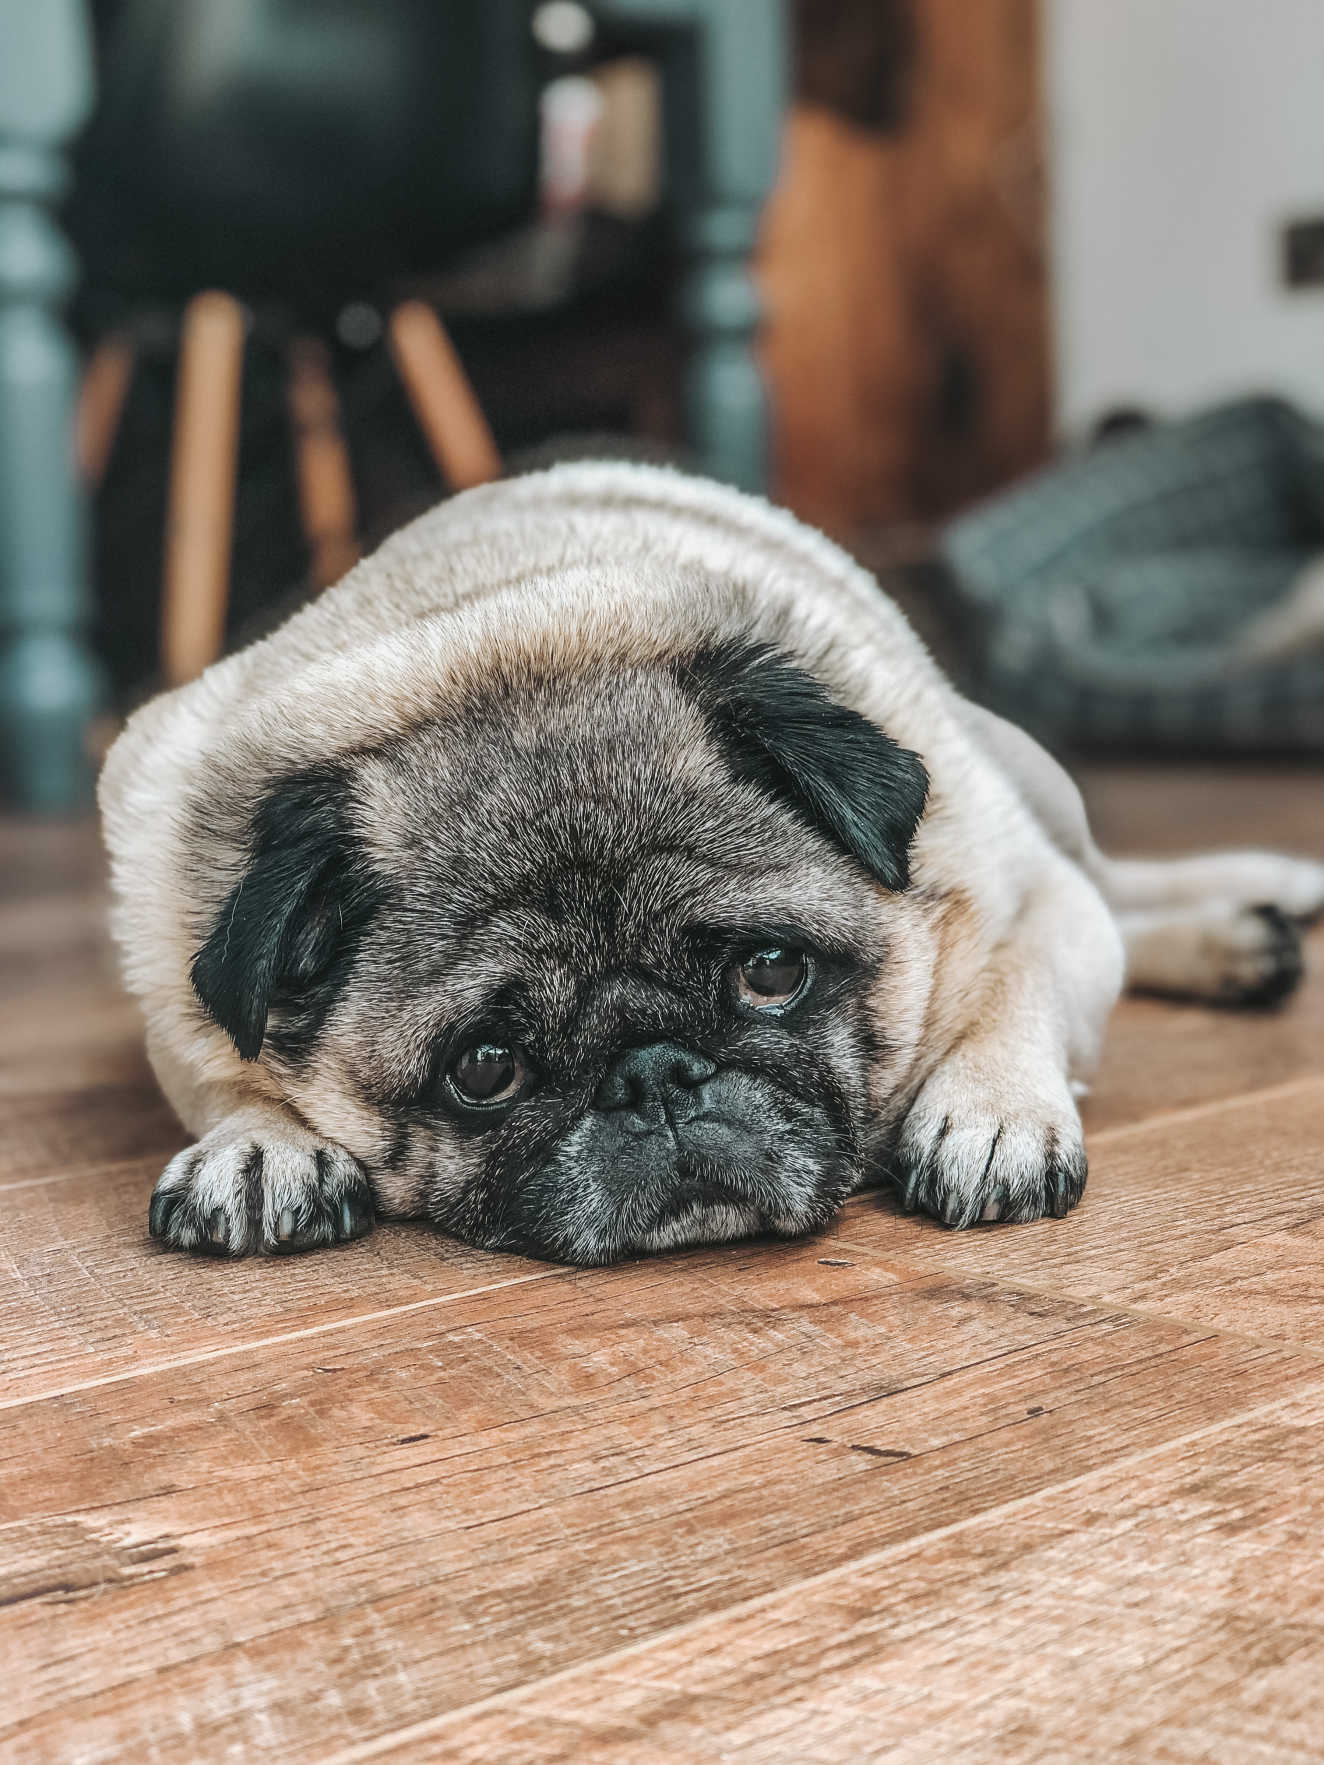 Is laminate wood floor good for pets